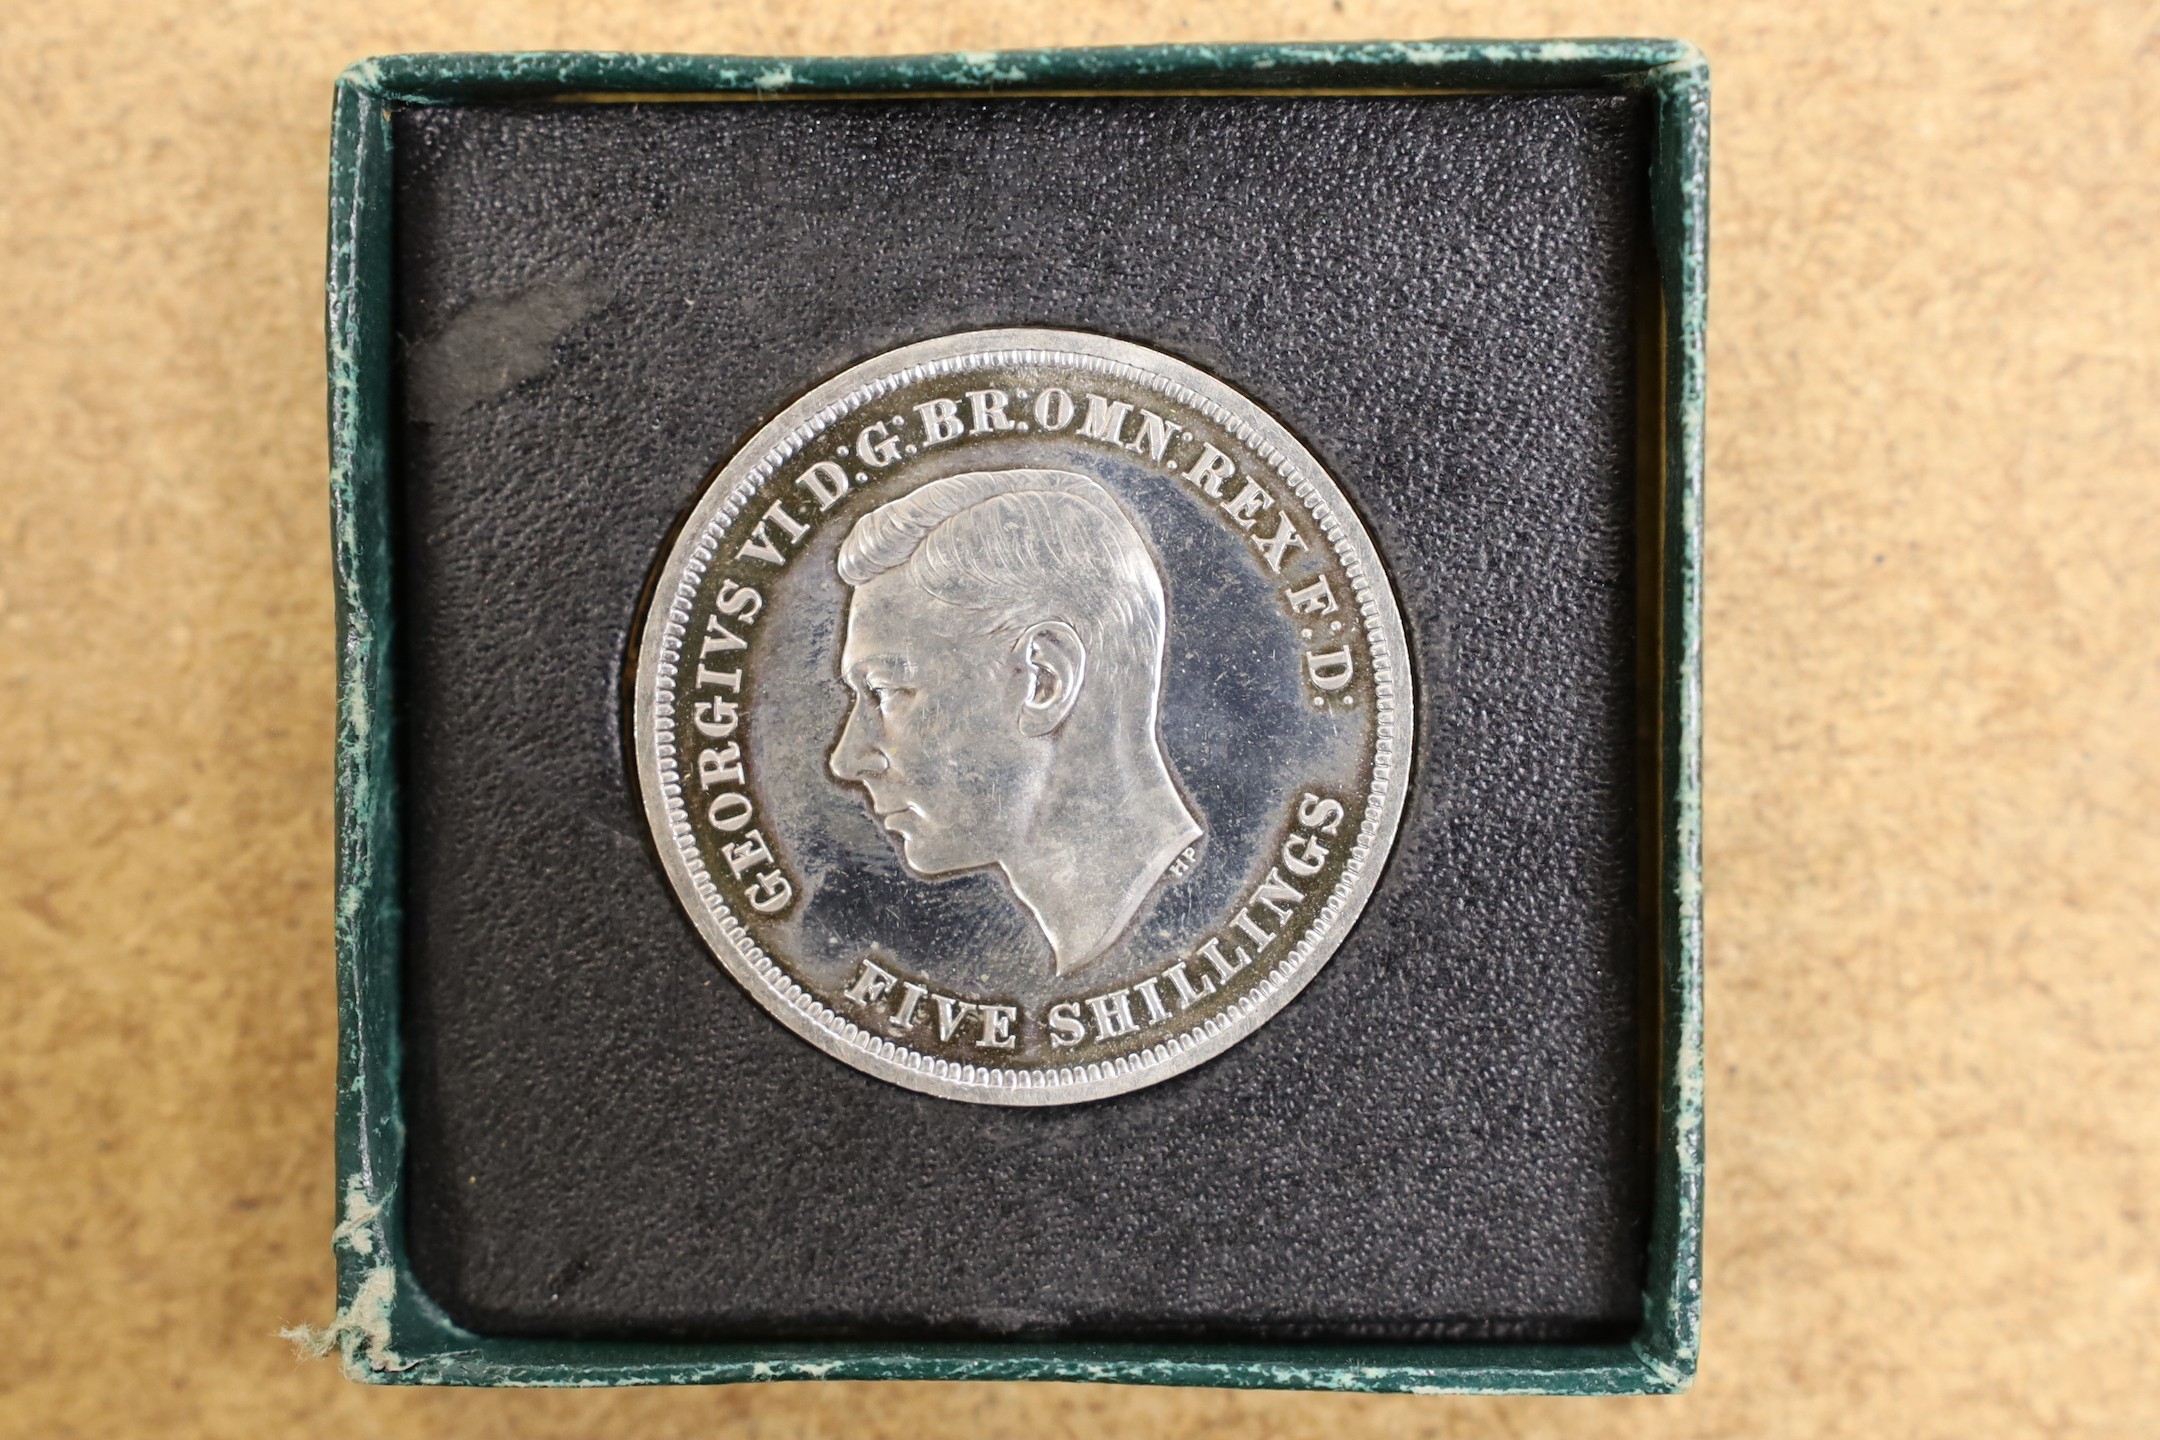 UK coins - Victoria maundy sets, 1899 in original case, 1893 in a later case, George V Maundy set 1915, later case and Edward VII maundy set 1904, later case, 3d worn, Together with various 19th/20th century commemorativ